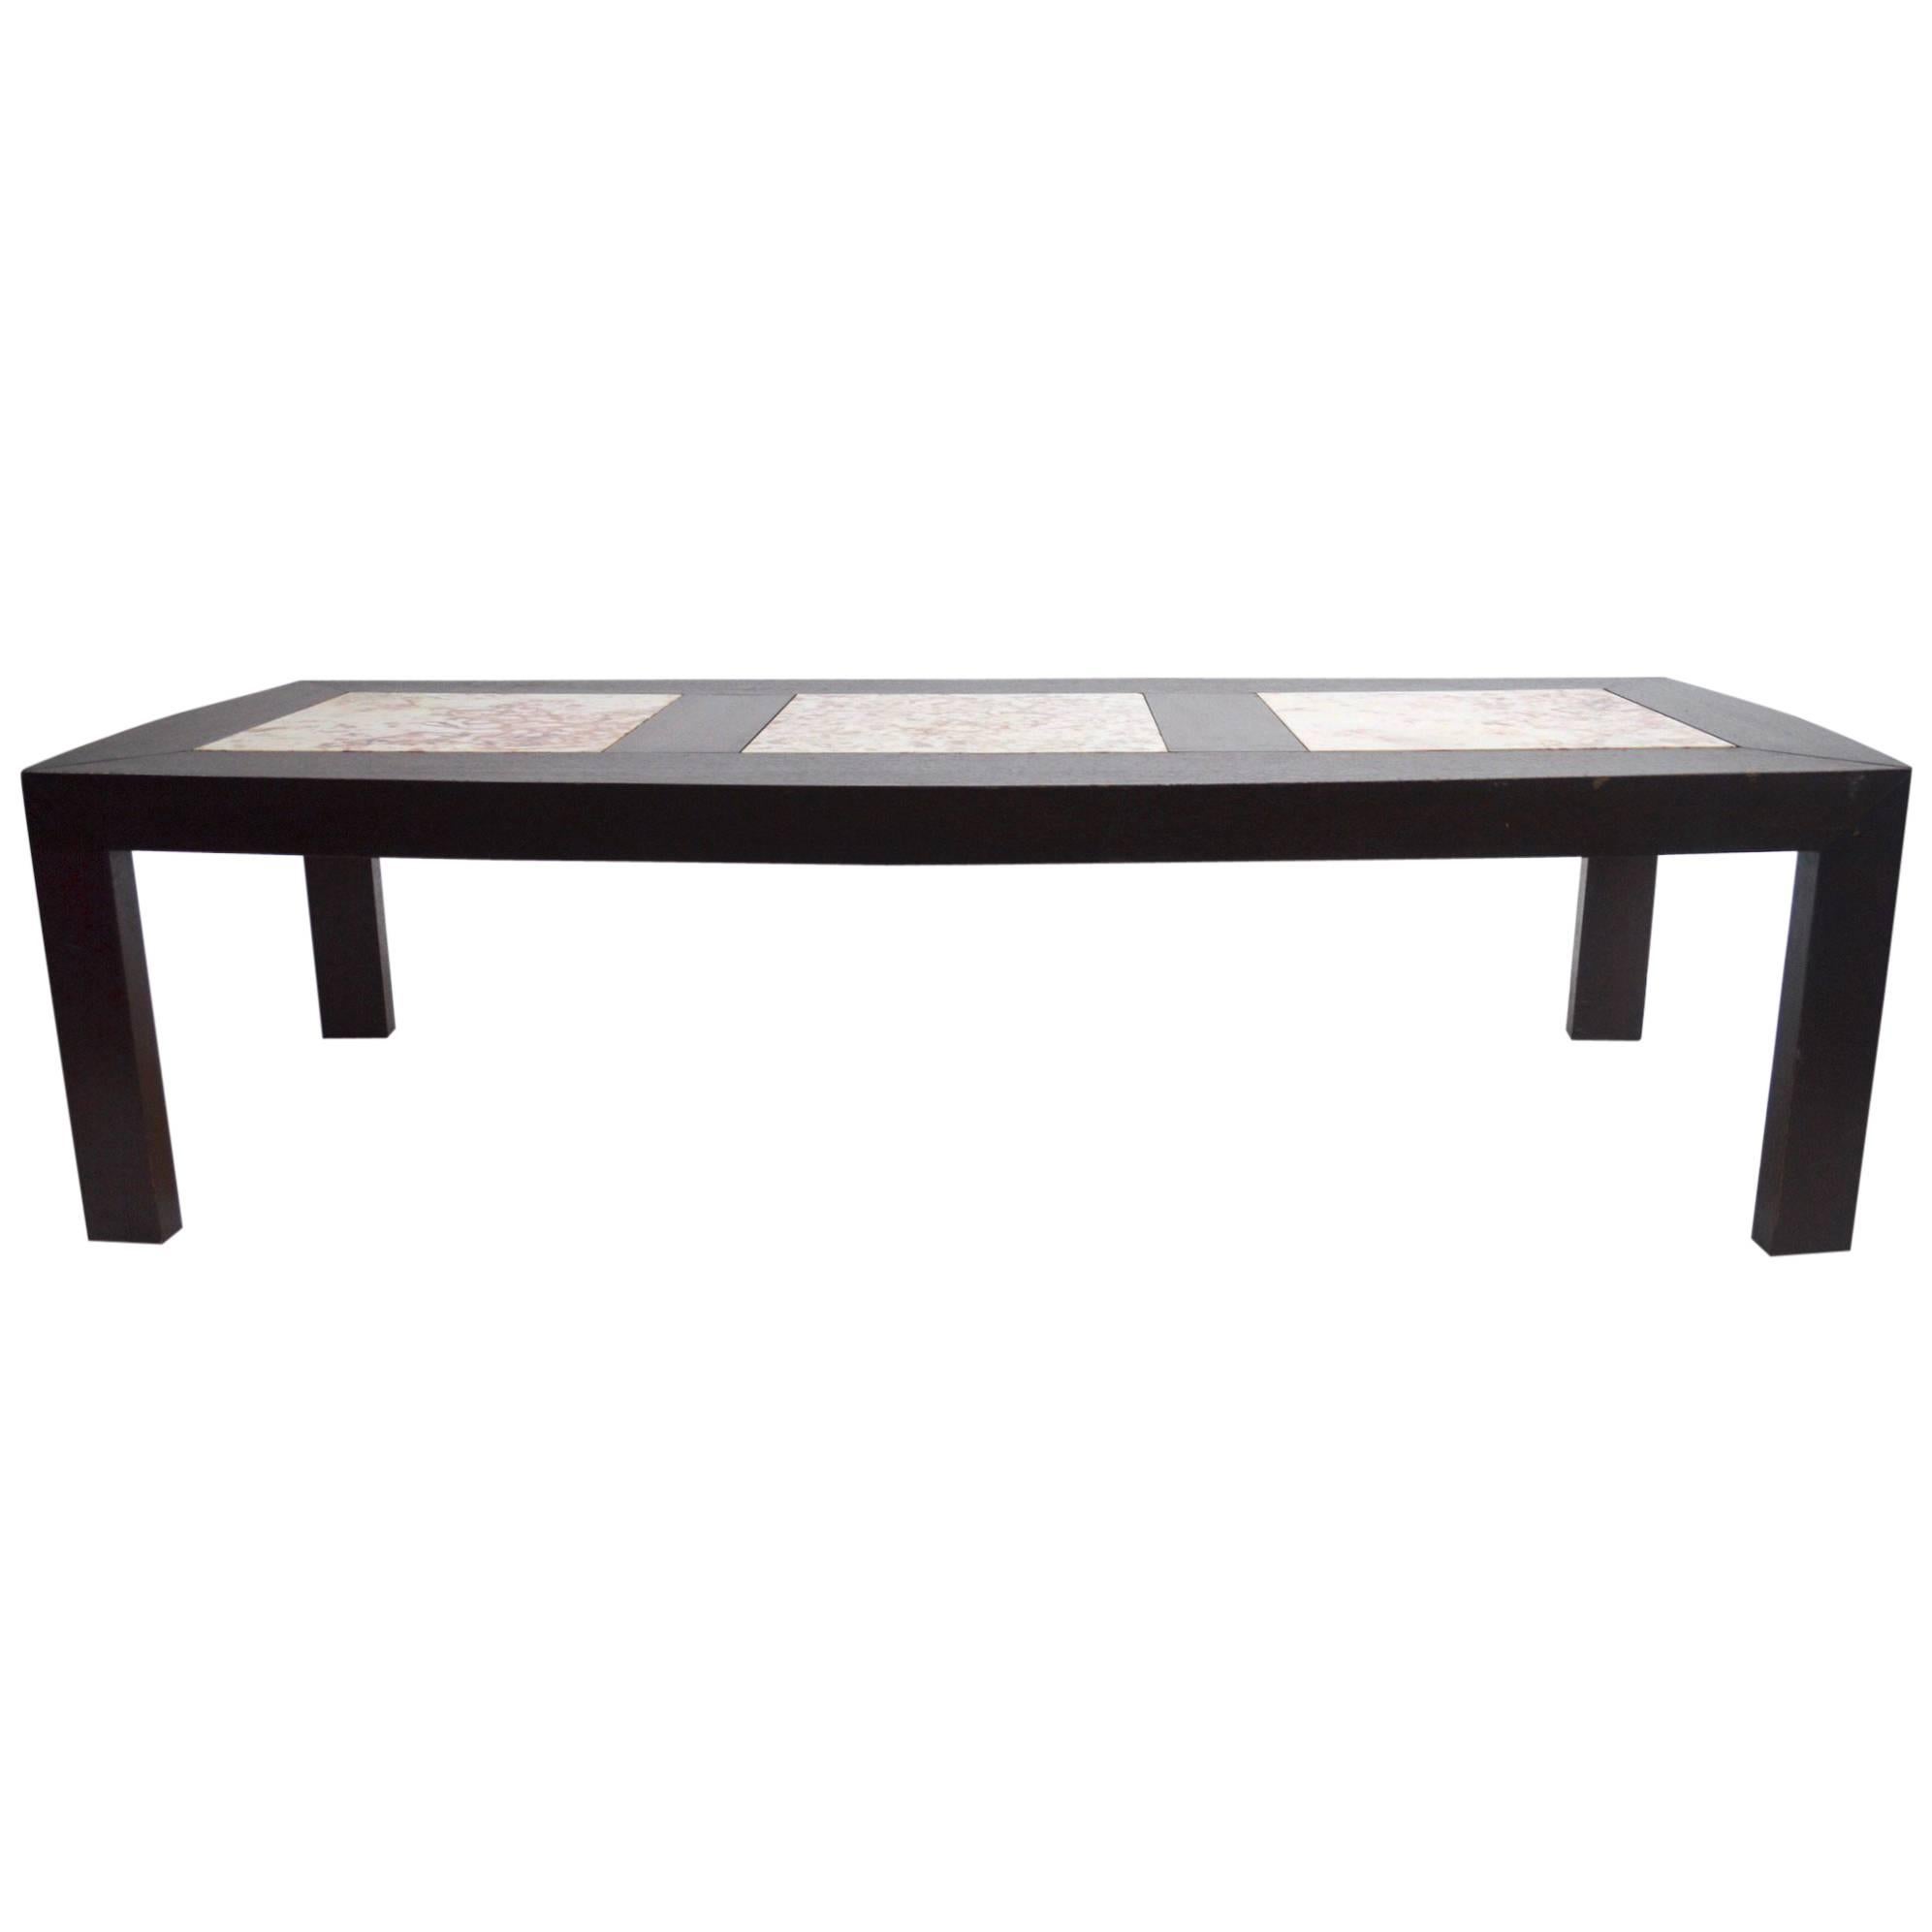 Tripartite Marble Insert Top Mid-Century Coffee Table Made in Malaysia